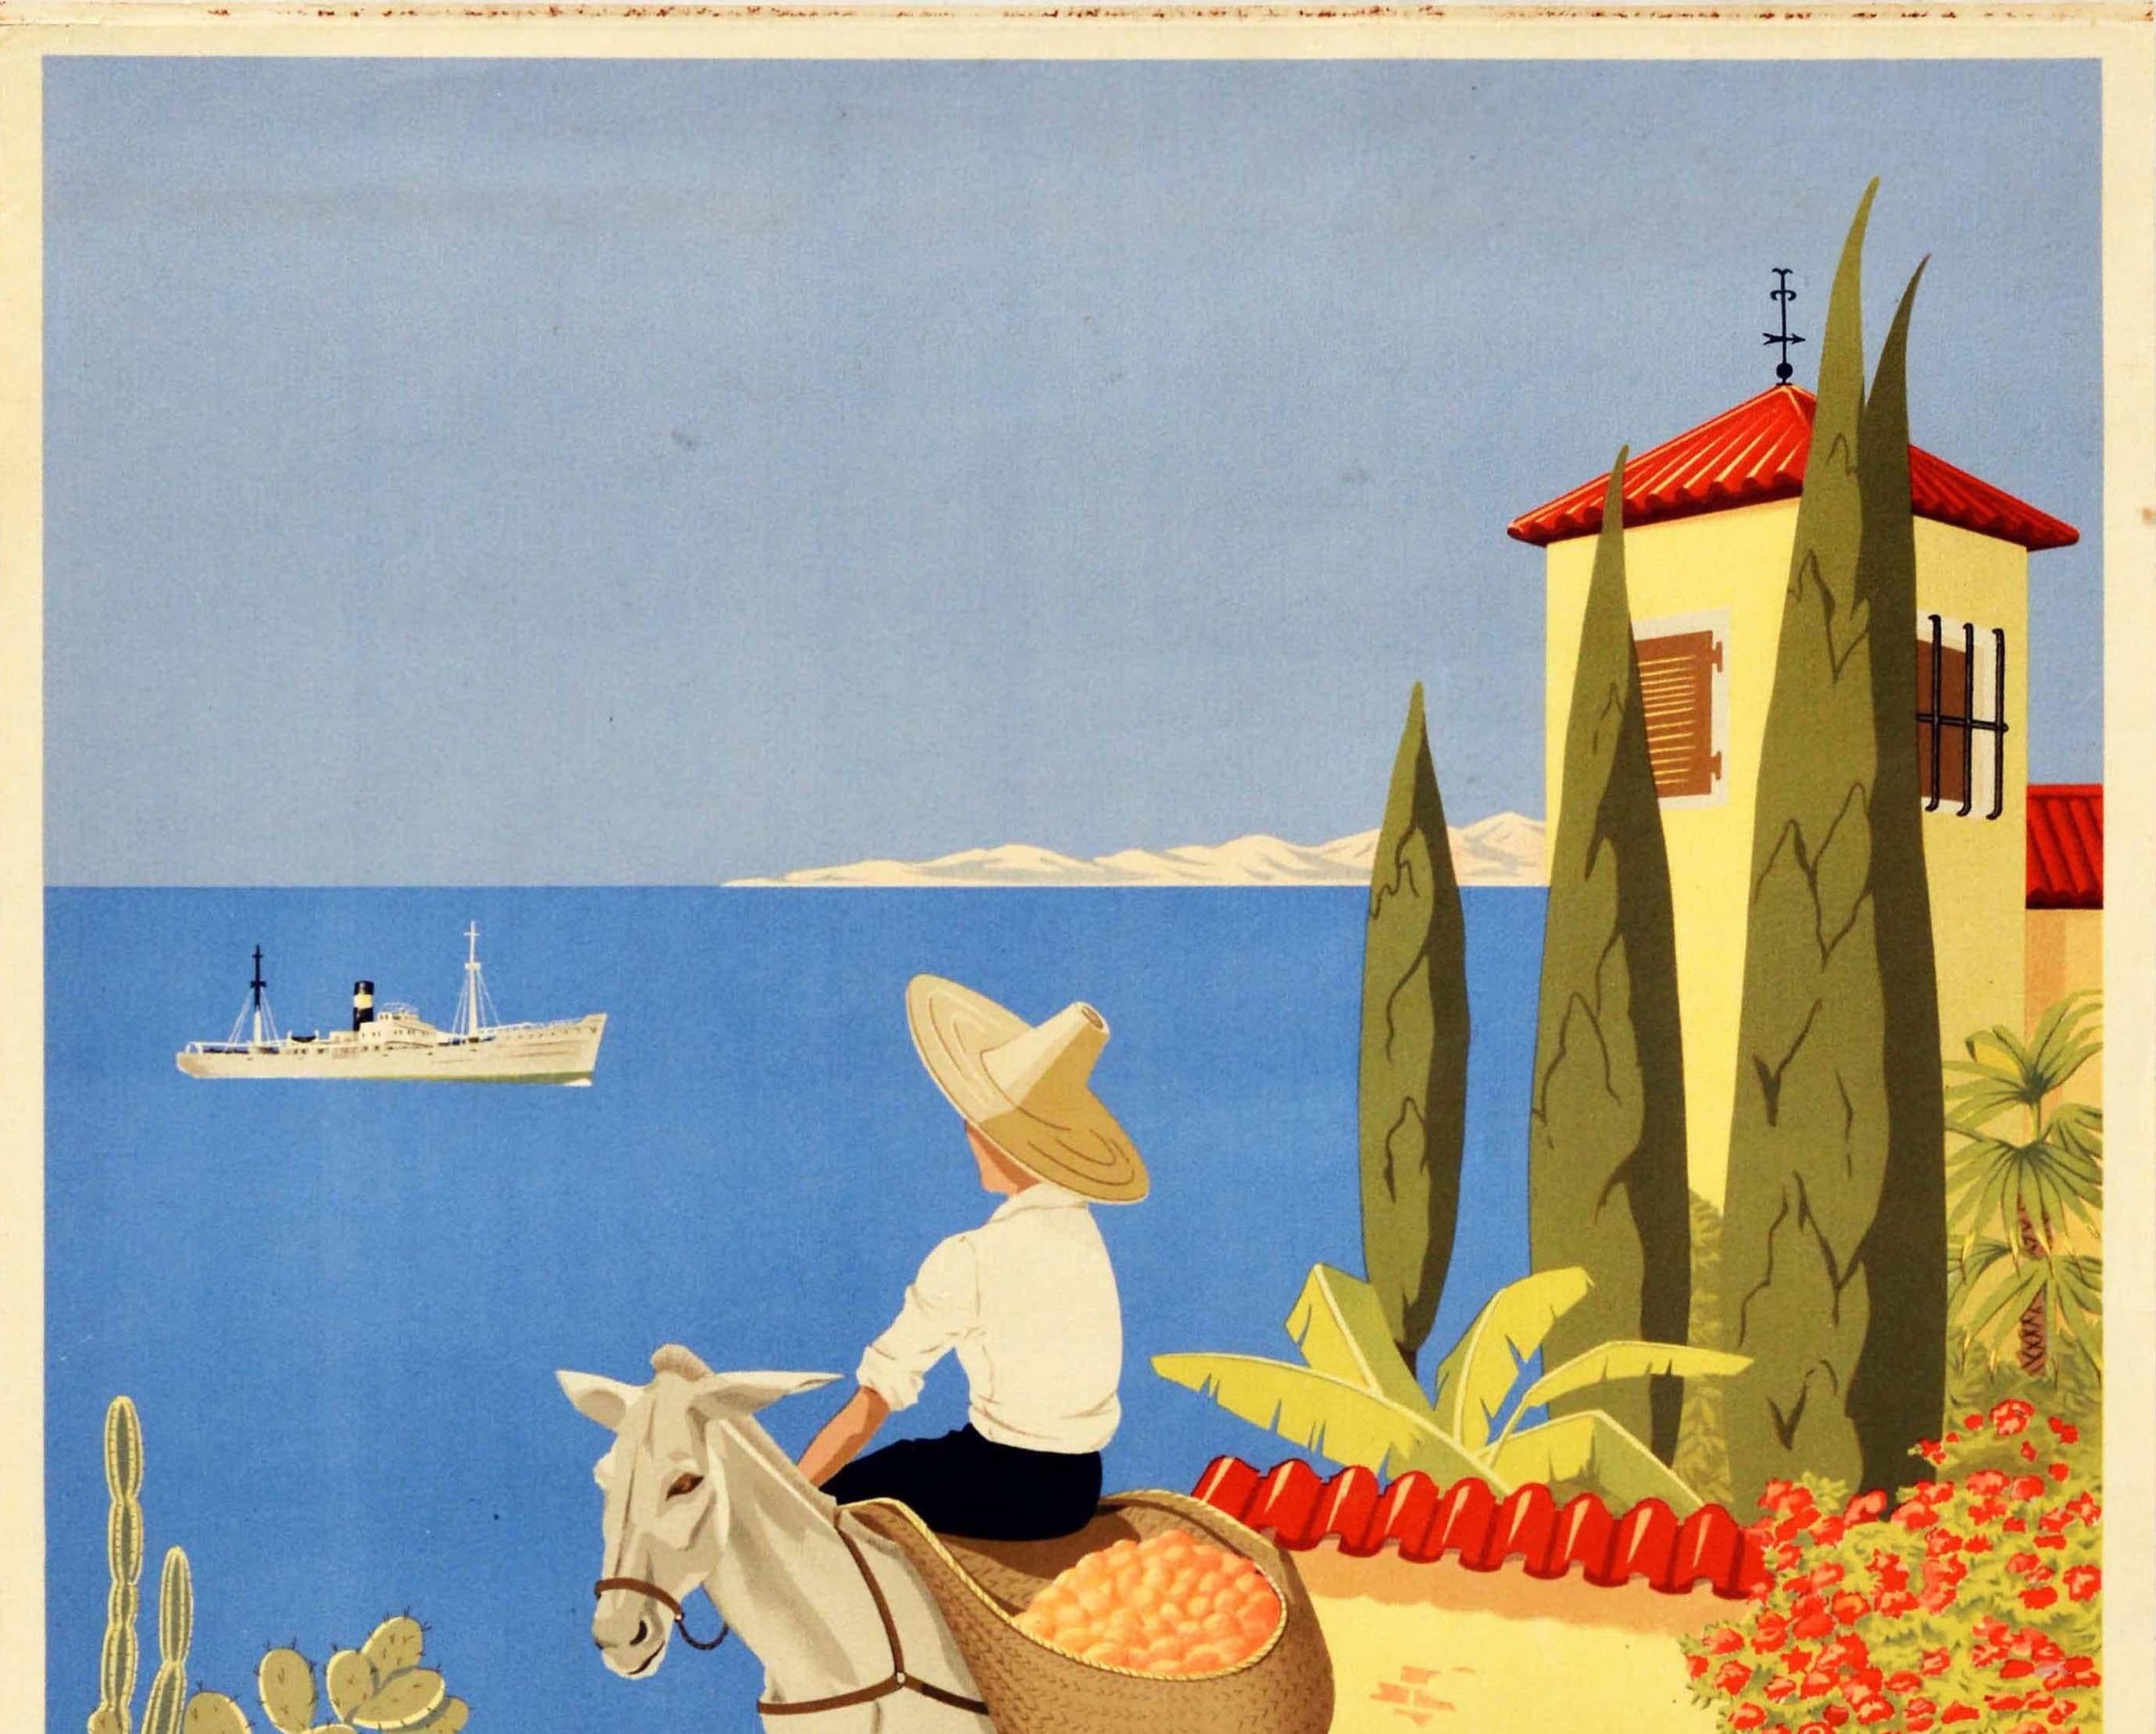 Original vintage cruise travel poster - Reist in den sonnigen Suden mit der Sloman Linie Hamburg / Travel to the sunny south with the Sloman Line Hamburg - featuring a great image showing a boy on a donkey laden with goods, watching a cruise ship